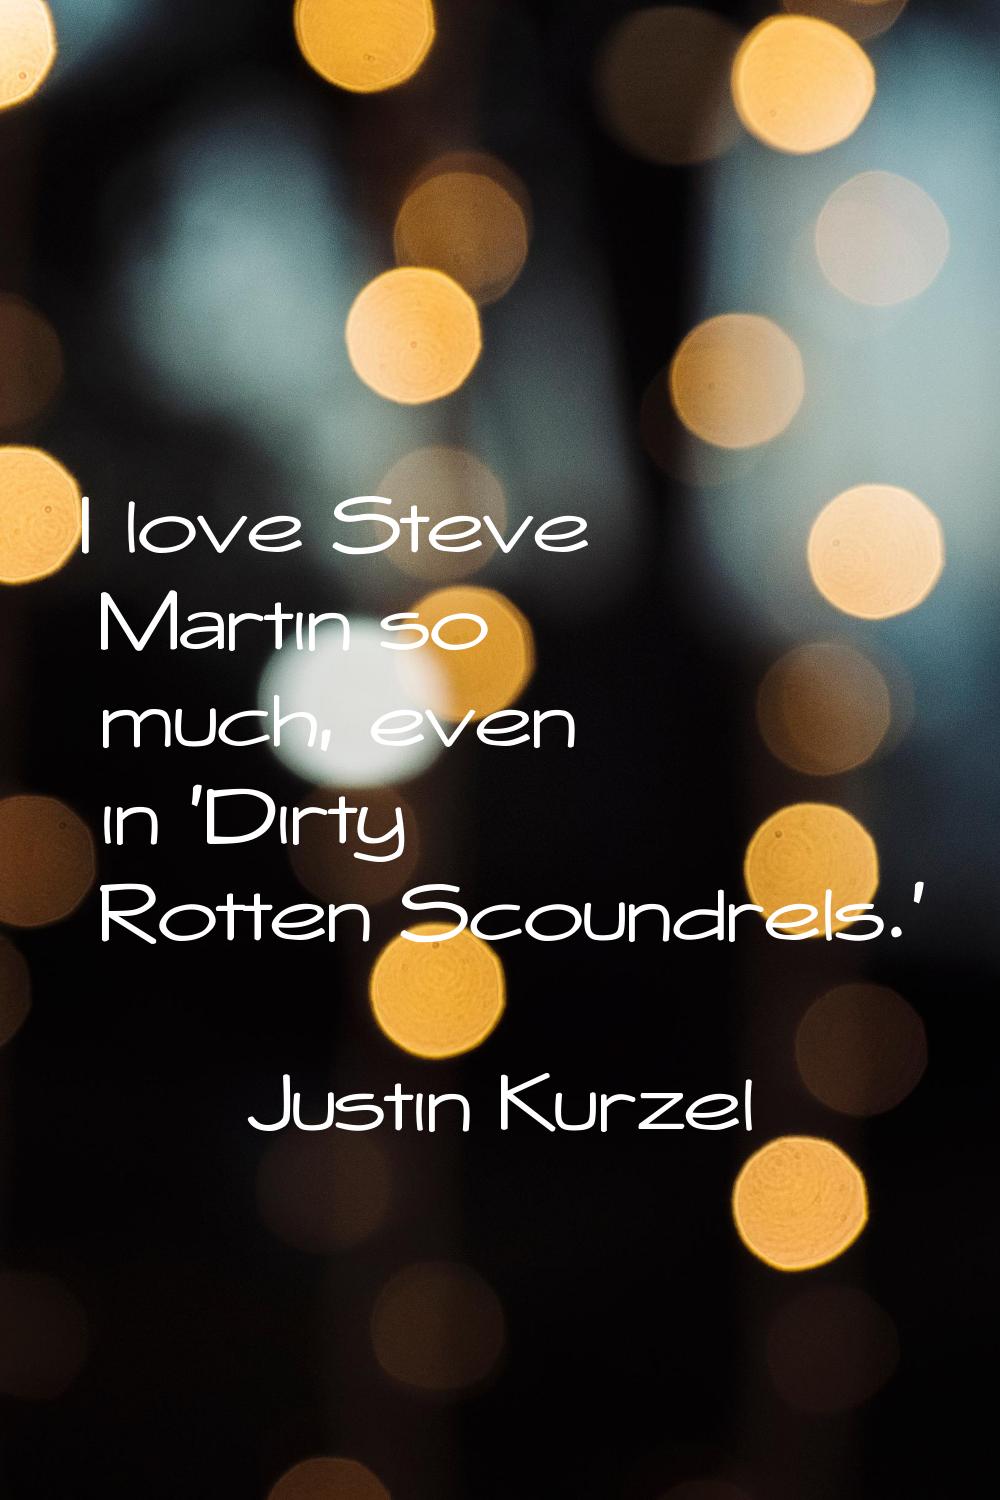 I love Steve Martin so much, even in 'Dirty Rotten Scoundrels.'